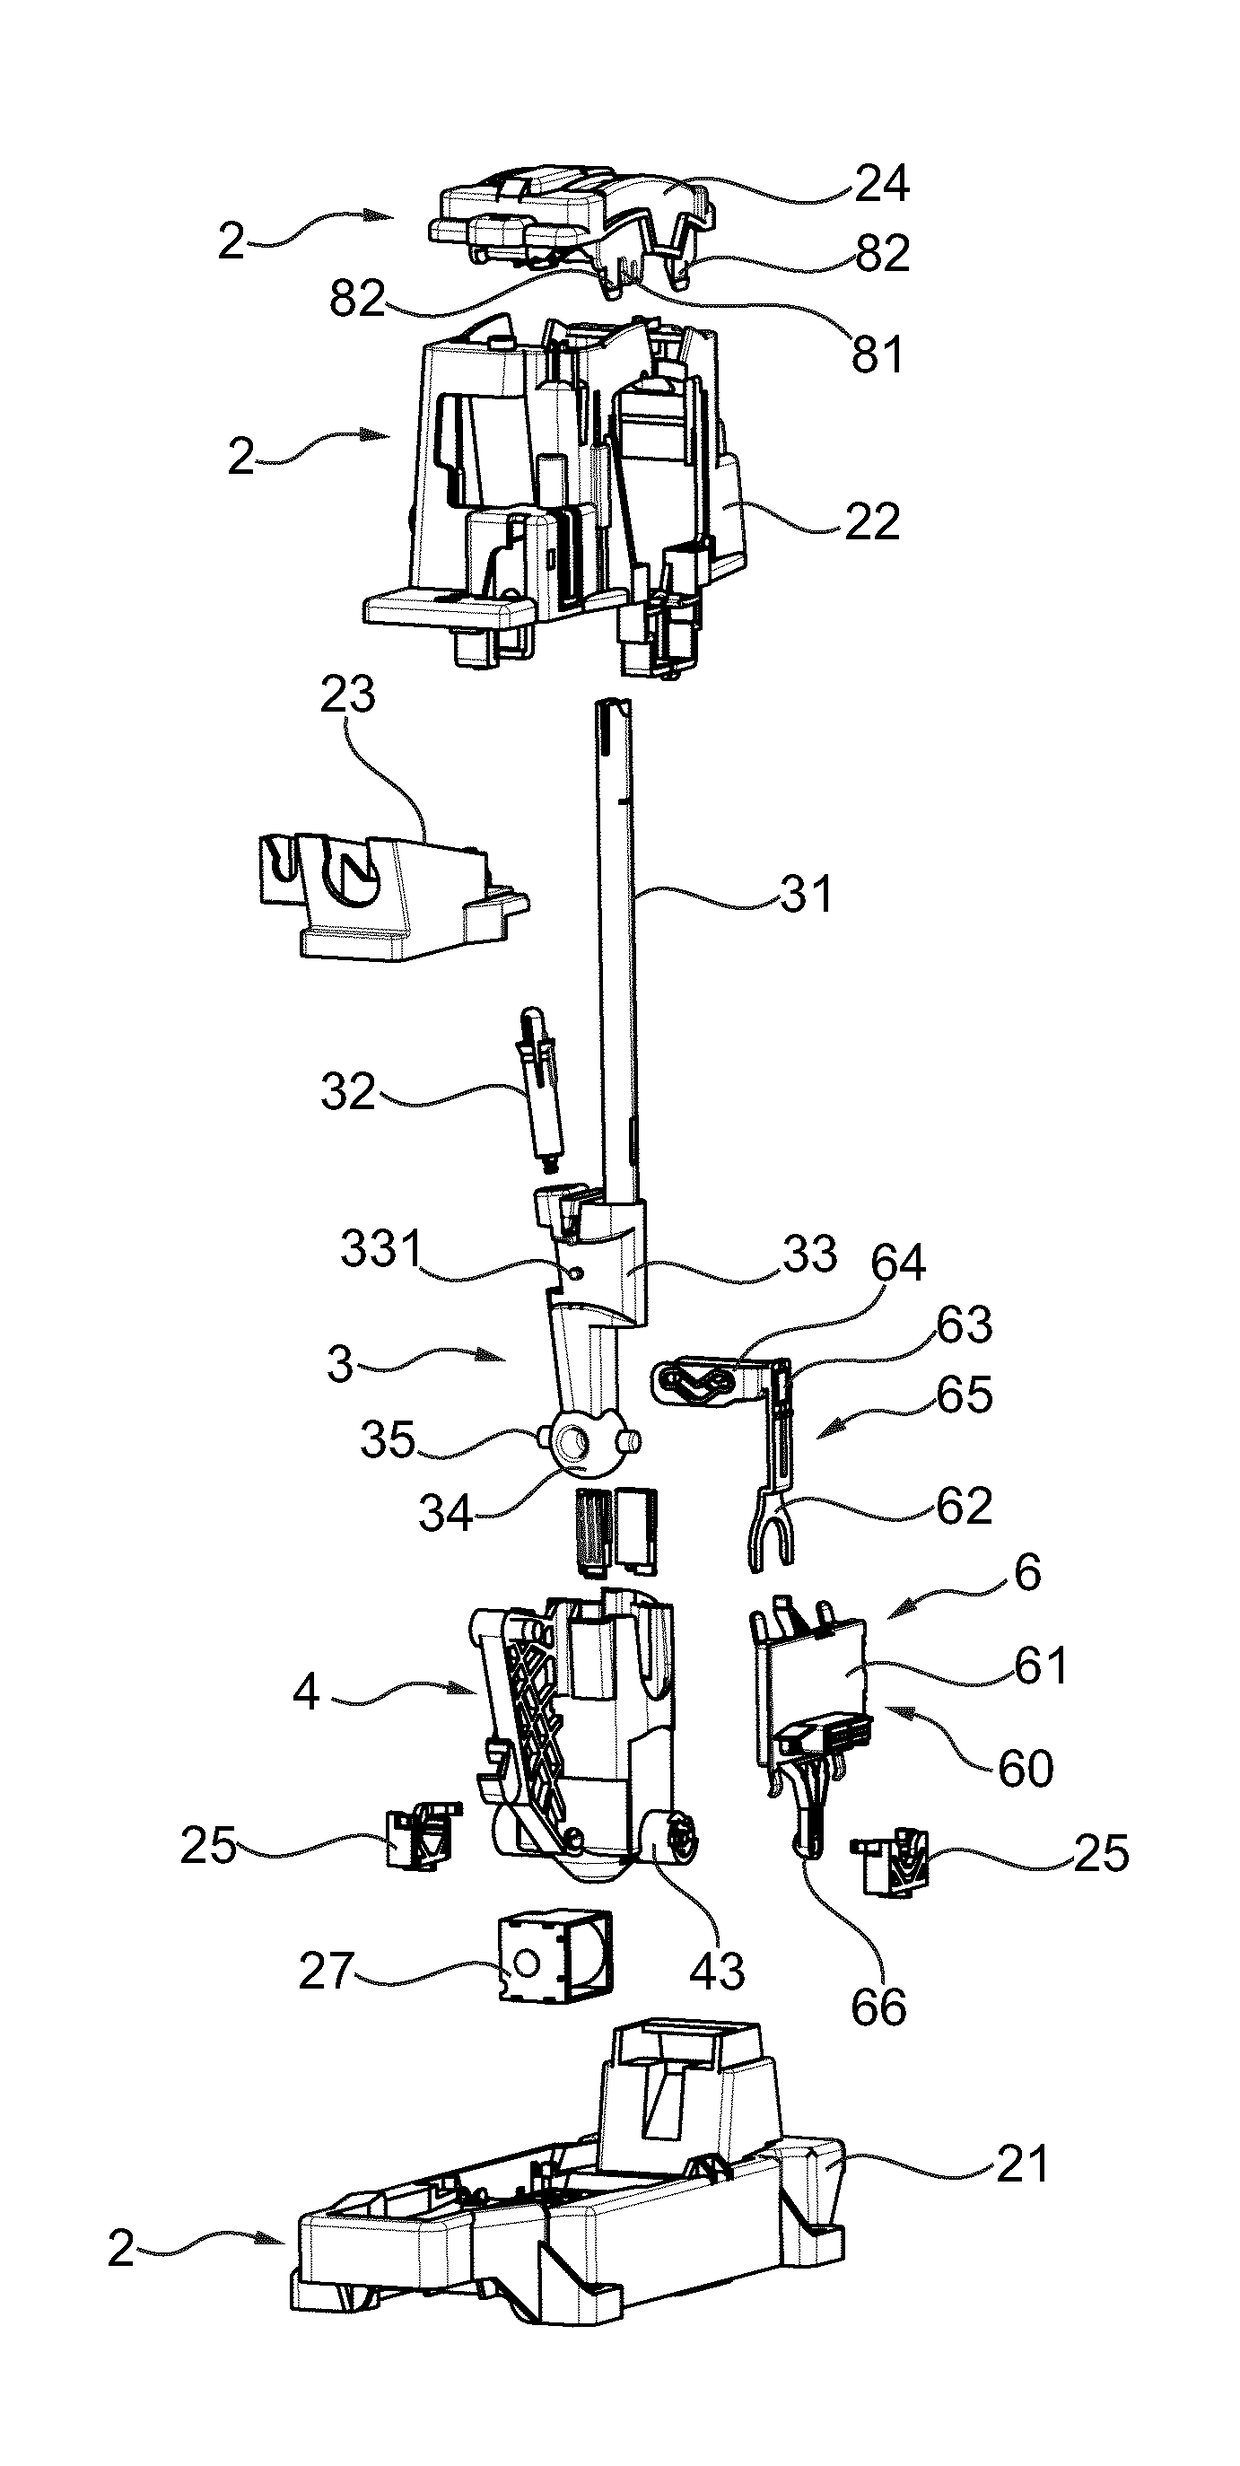 Shift lever assembly with electronic detection of modes of transmission